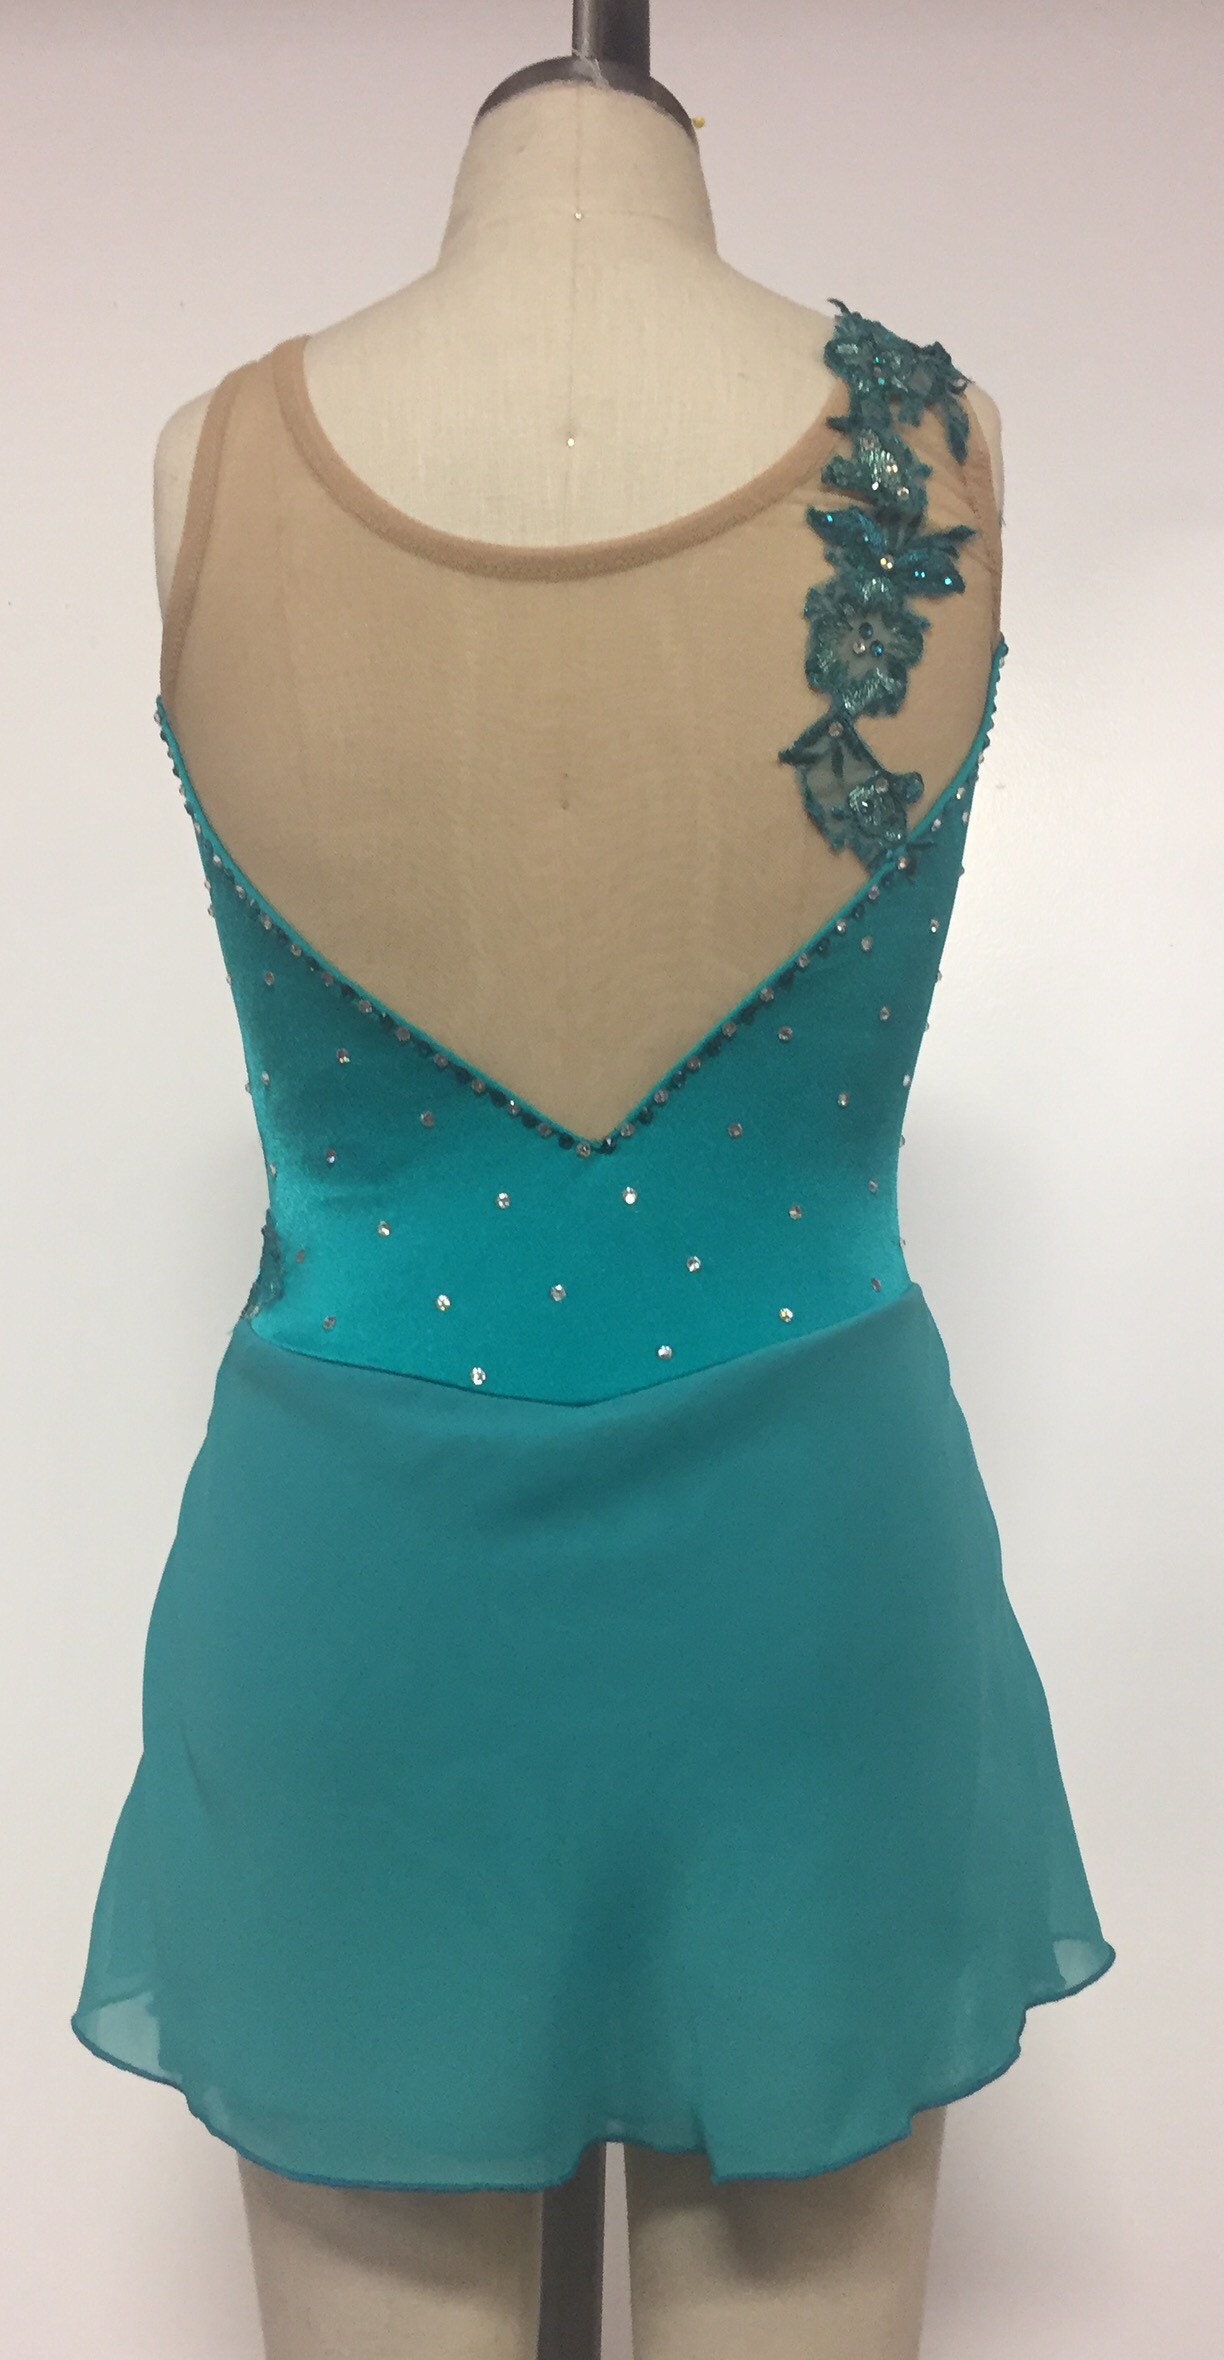 Youth XL teal blue figure skating dress | Etsy